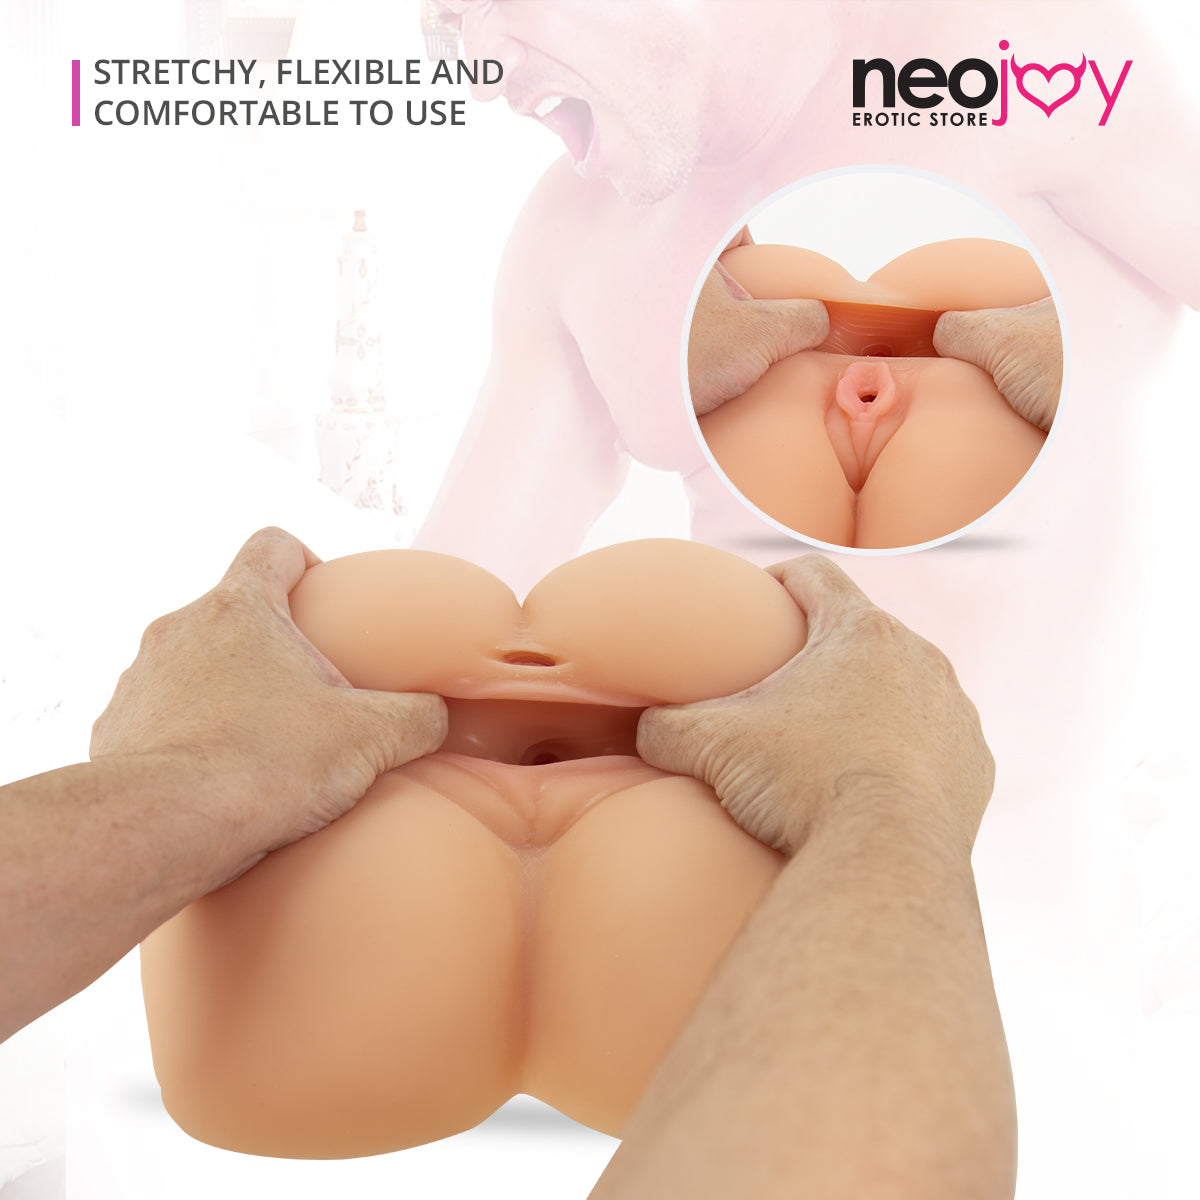 Neojoy Stripped Fantasy Realistic Sex Doll with Pussy & Ass TPE Flesh - Small 4.7Kg